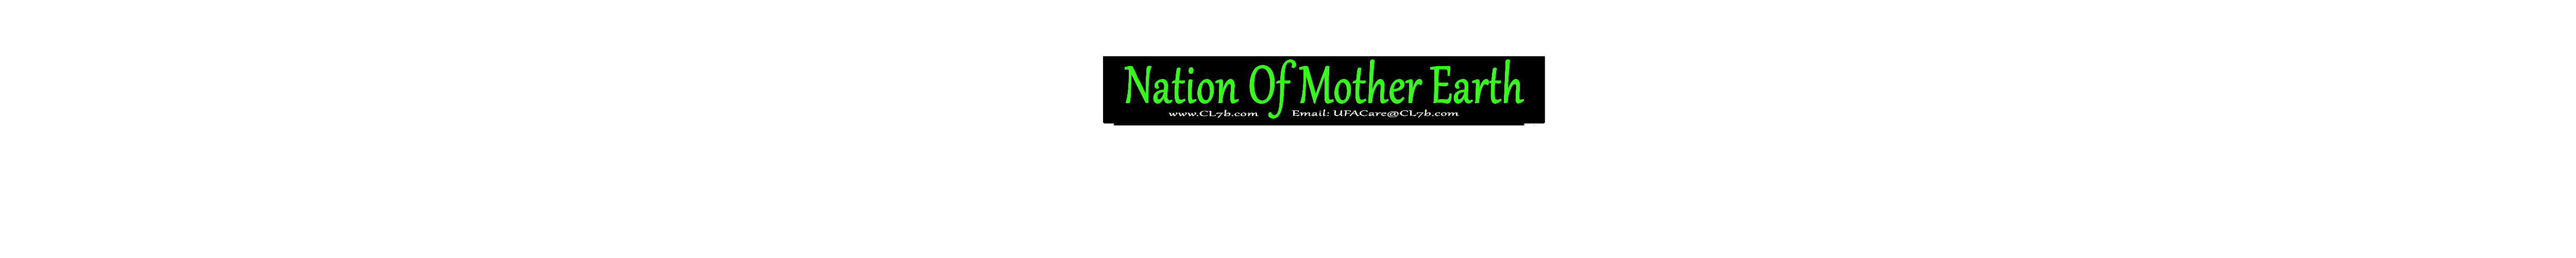 Nation Of Mother Earth